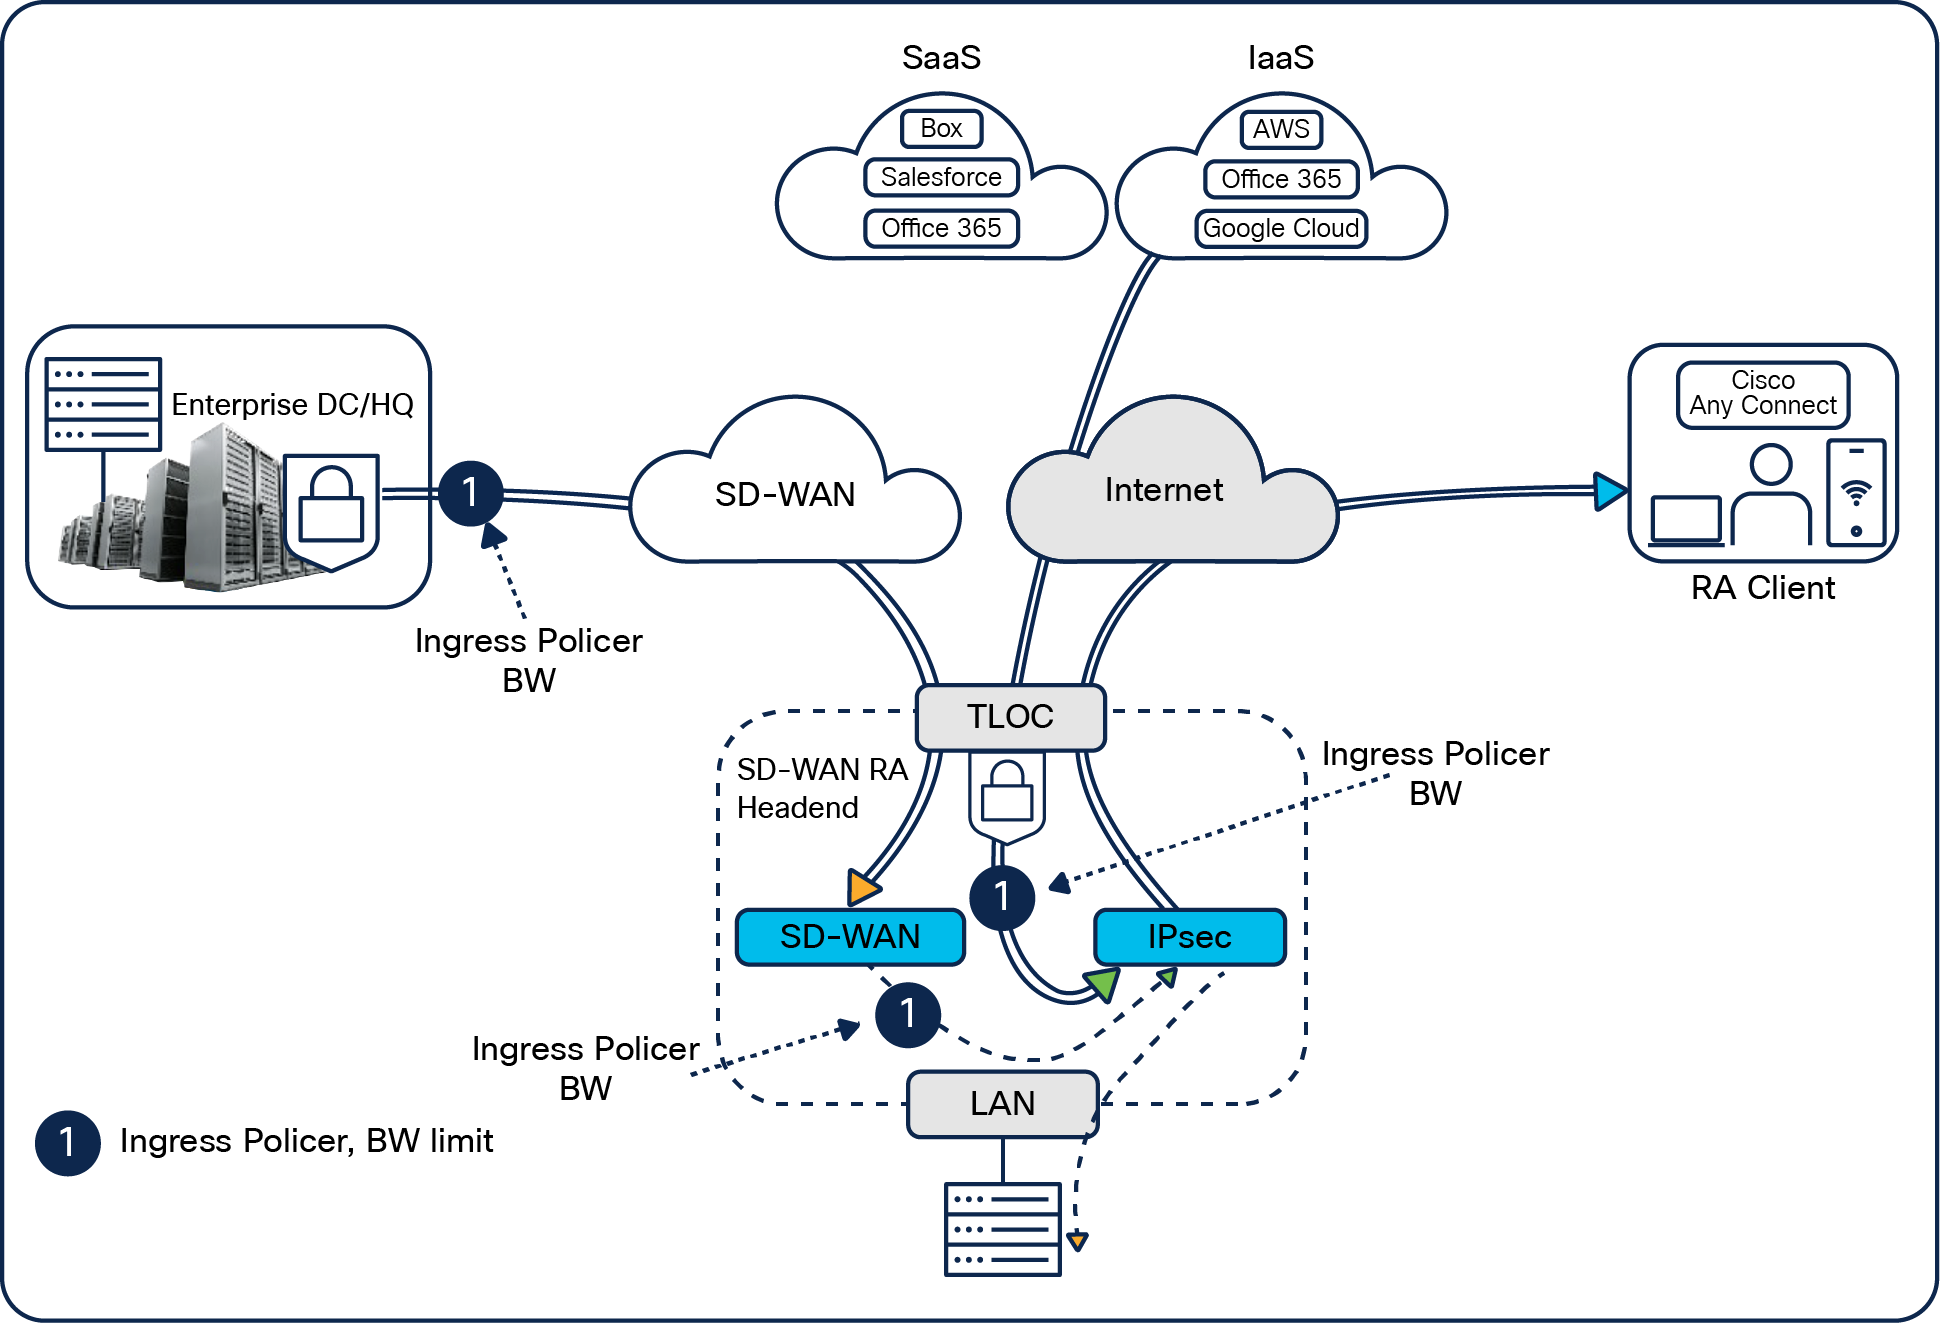 Remote-access client downstream traffic